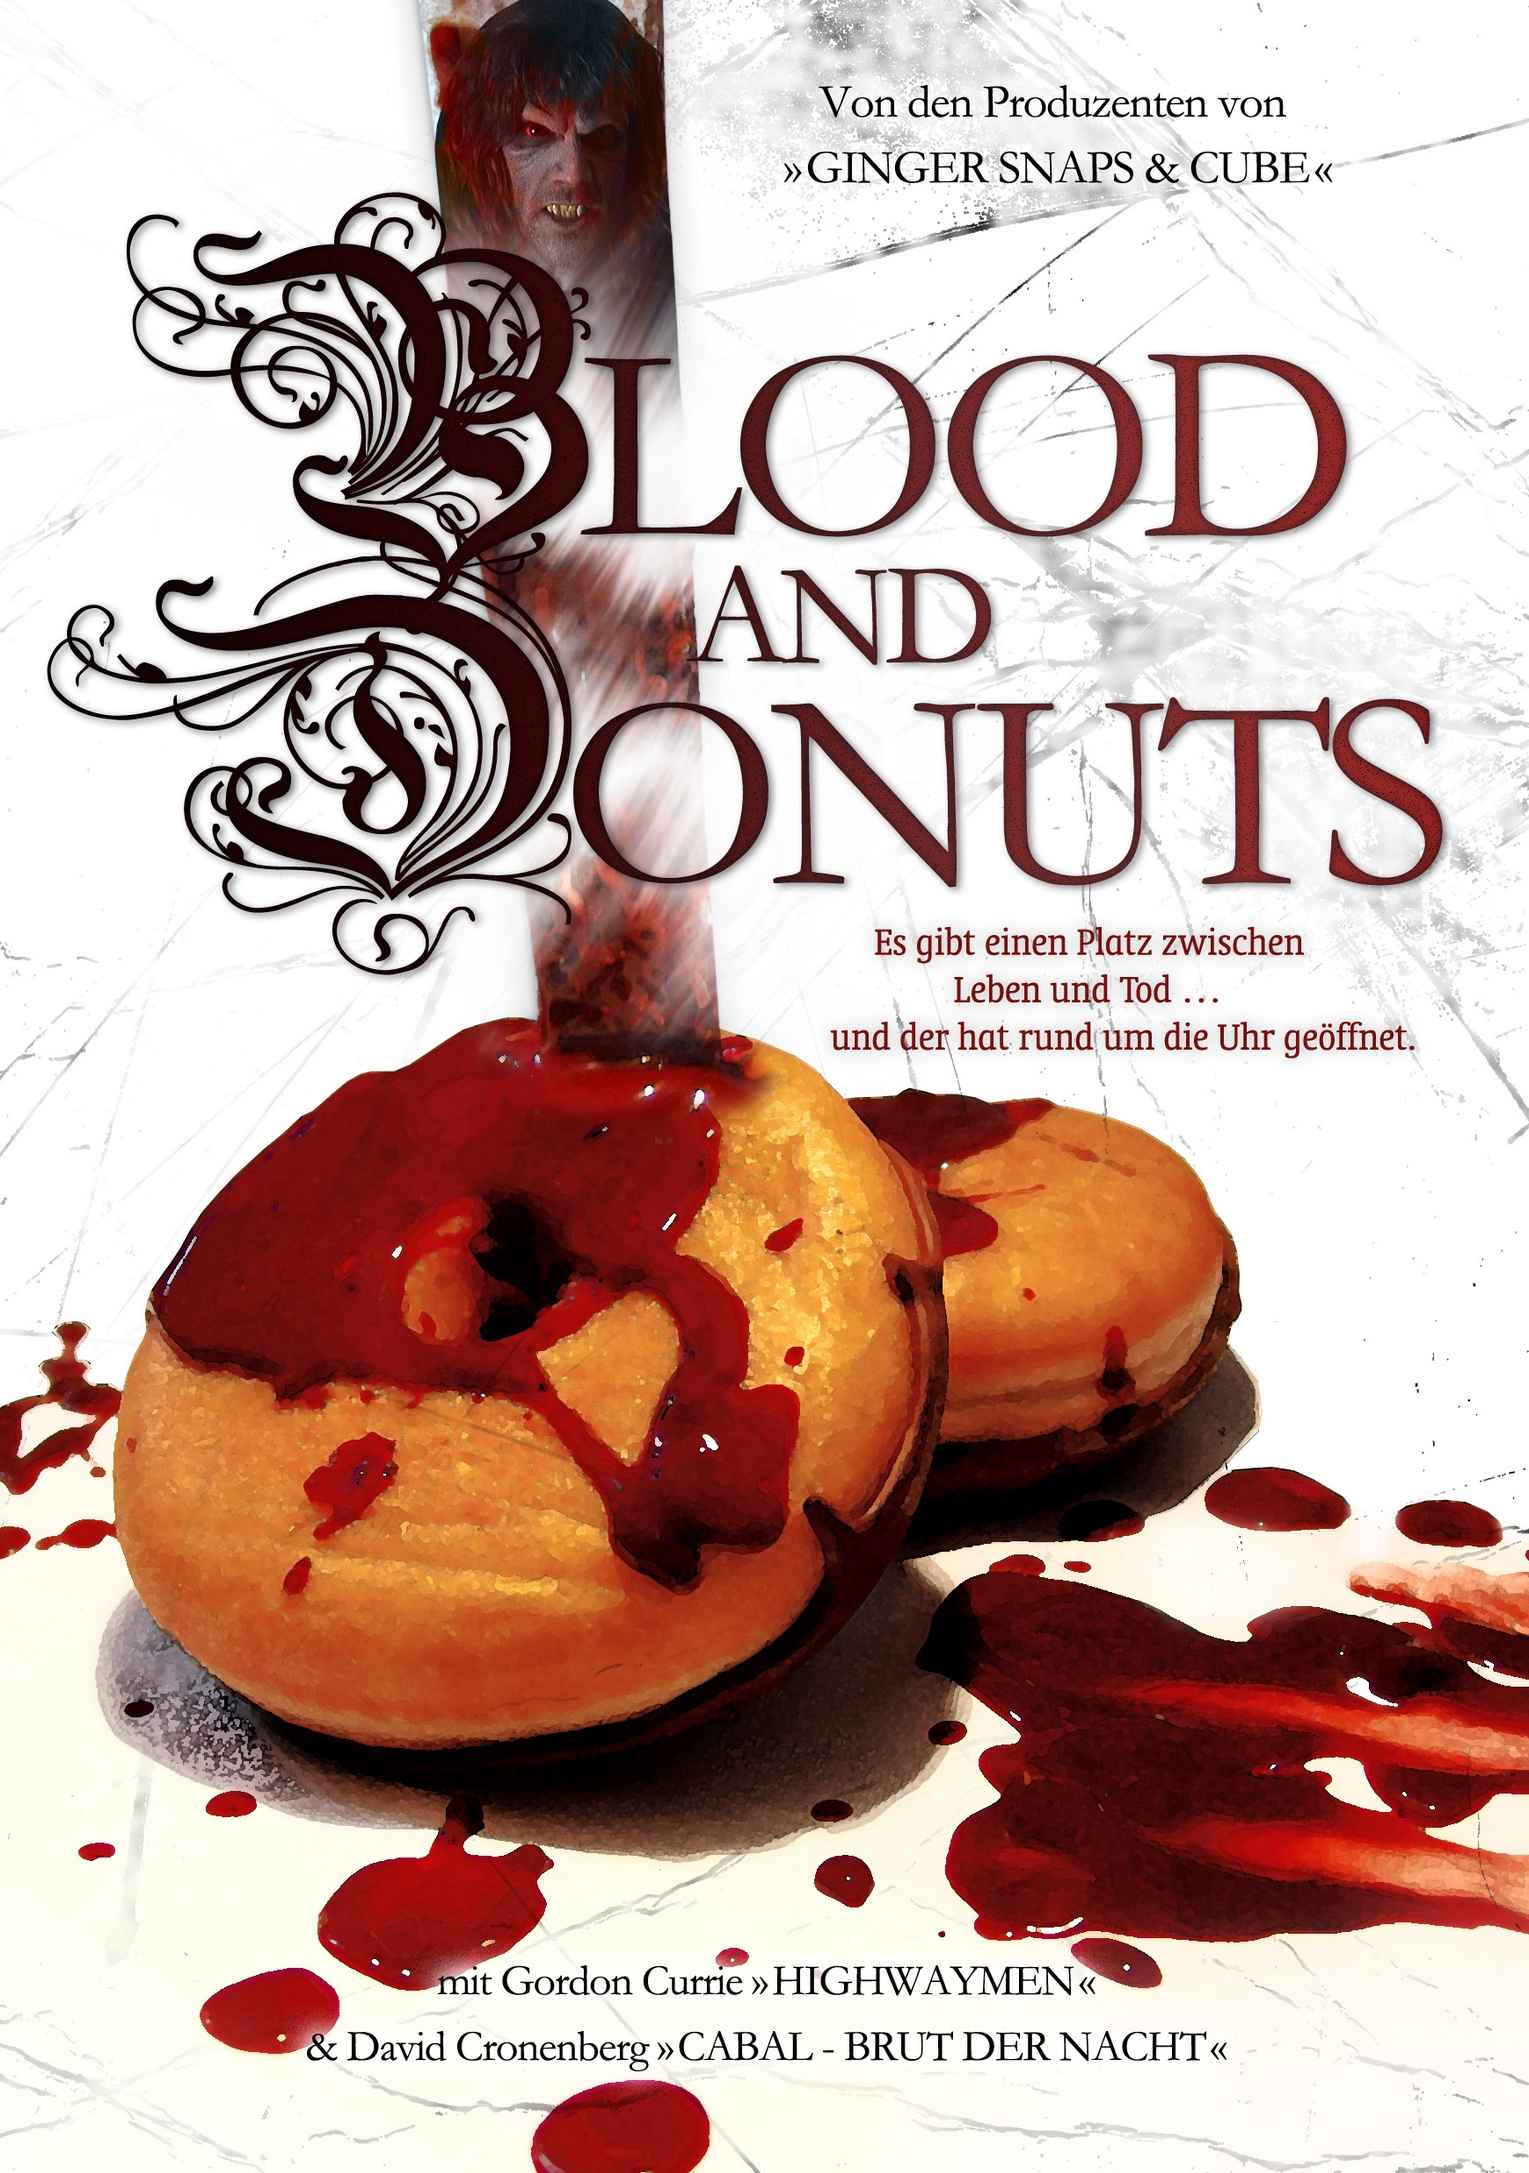 blood & donuts Cover Front FINAL Hochauslösend